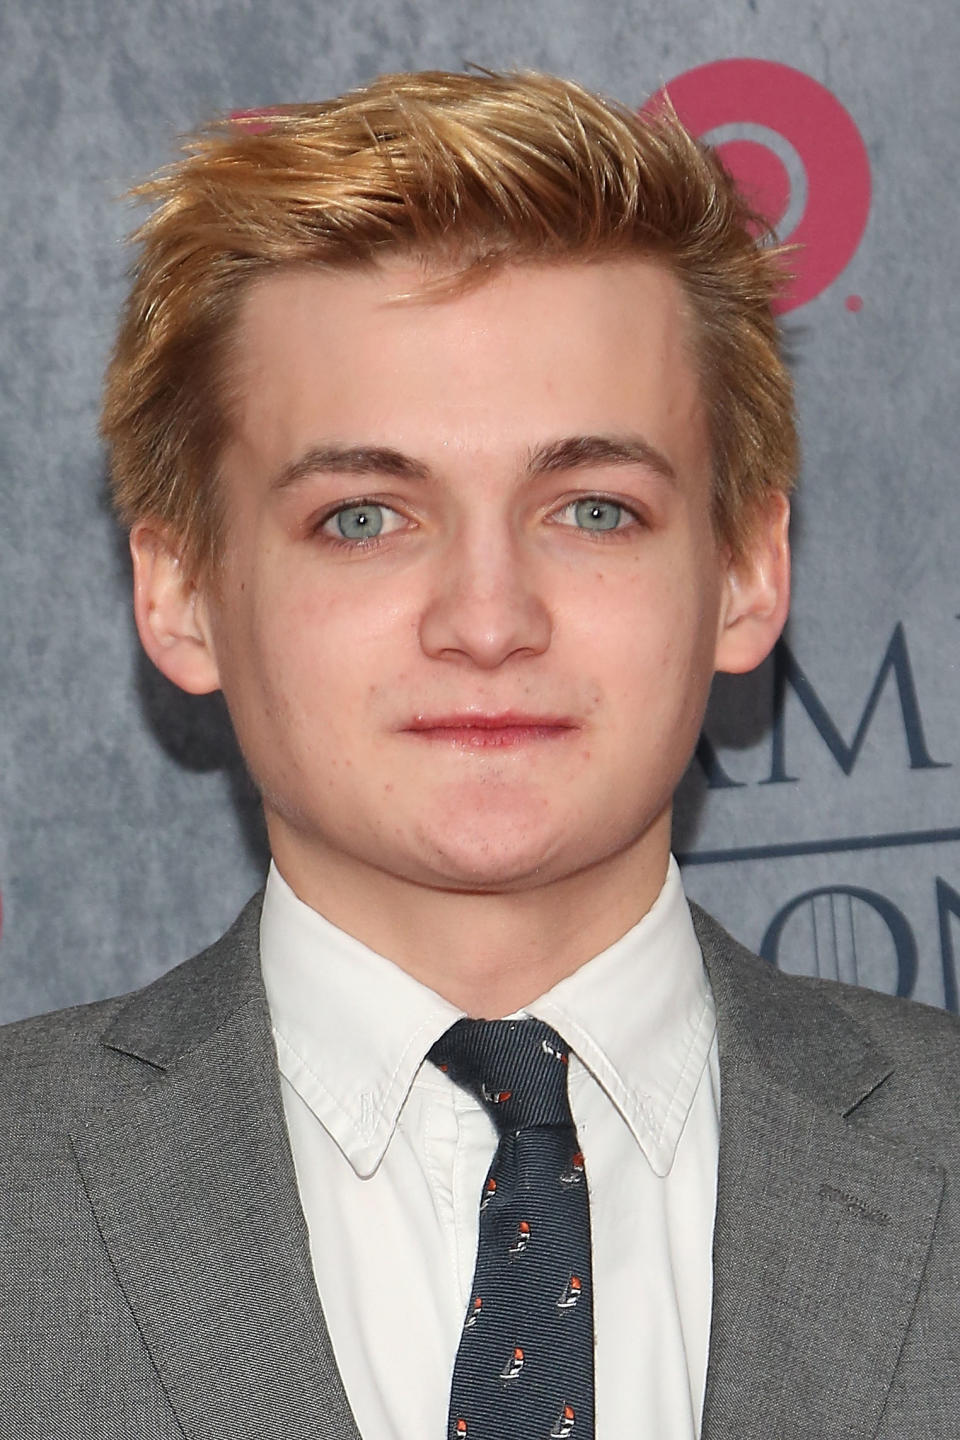 Jack Gleeson attends the "Game Of Thrones" Season 4 premiere at Avery Fisher Hall, Lincoln Center on March 18, 2014 in New York City.  (Photo by Taylor Hill/FilmMagic)